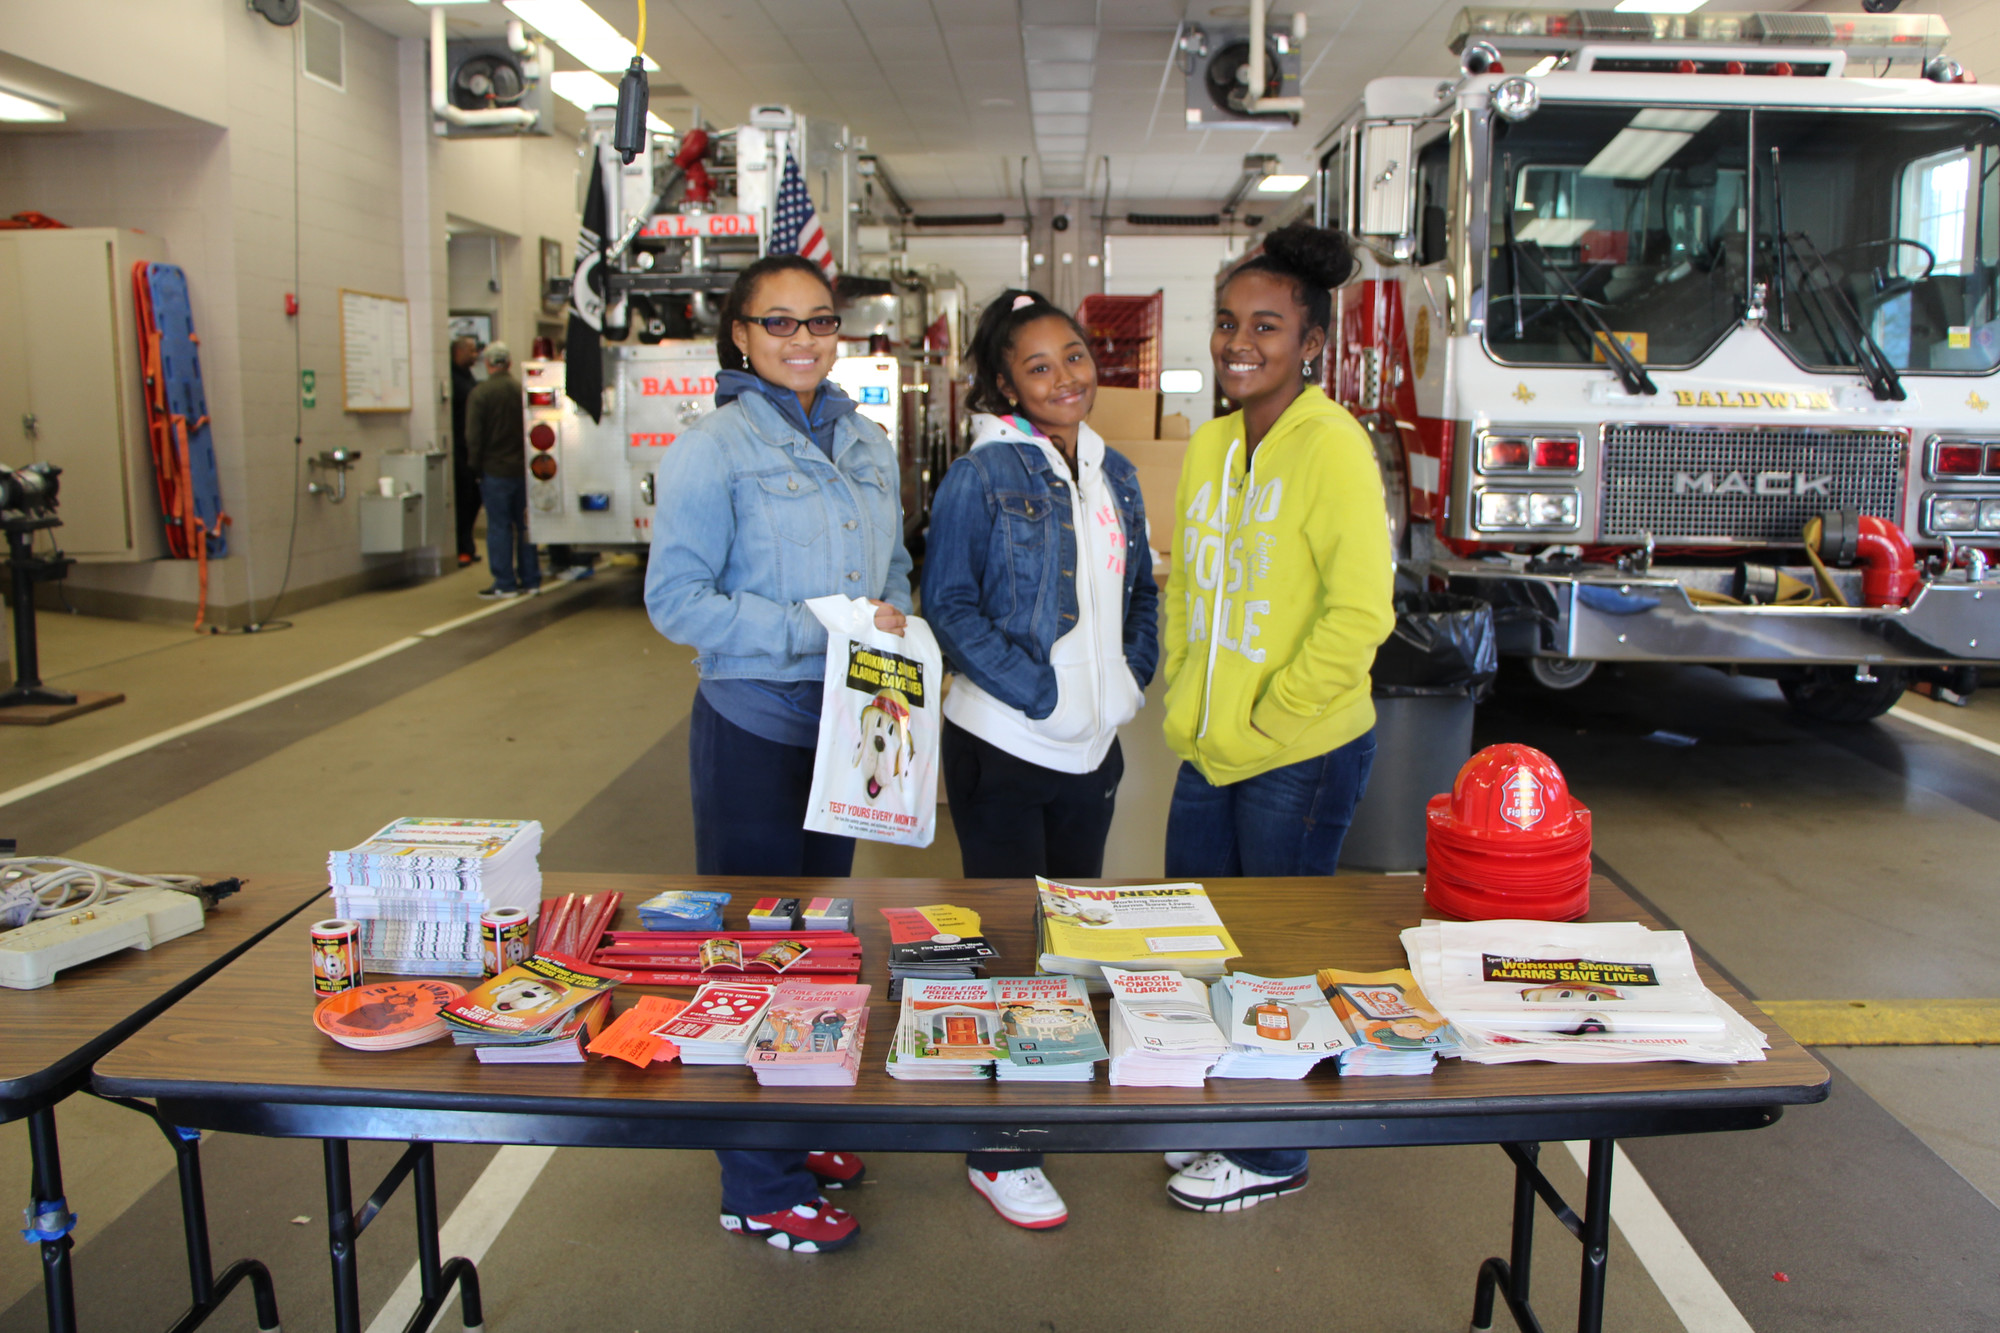 Family members of the BFD helped distribute information and hemlets to the children and residents. From left were Matinash Cesar, 15, Meylyne Cesar, 13, and Maurine Cesar, 12.